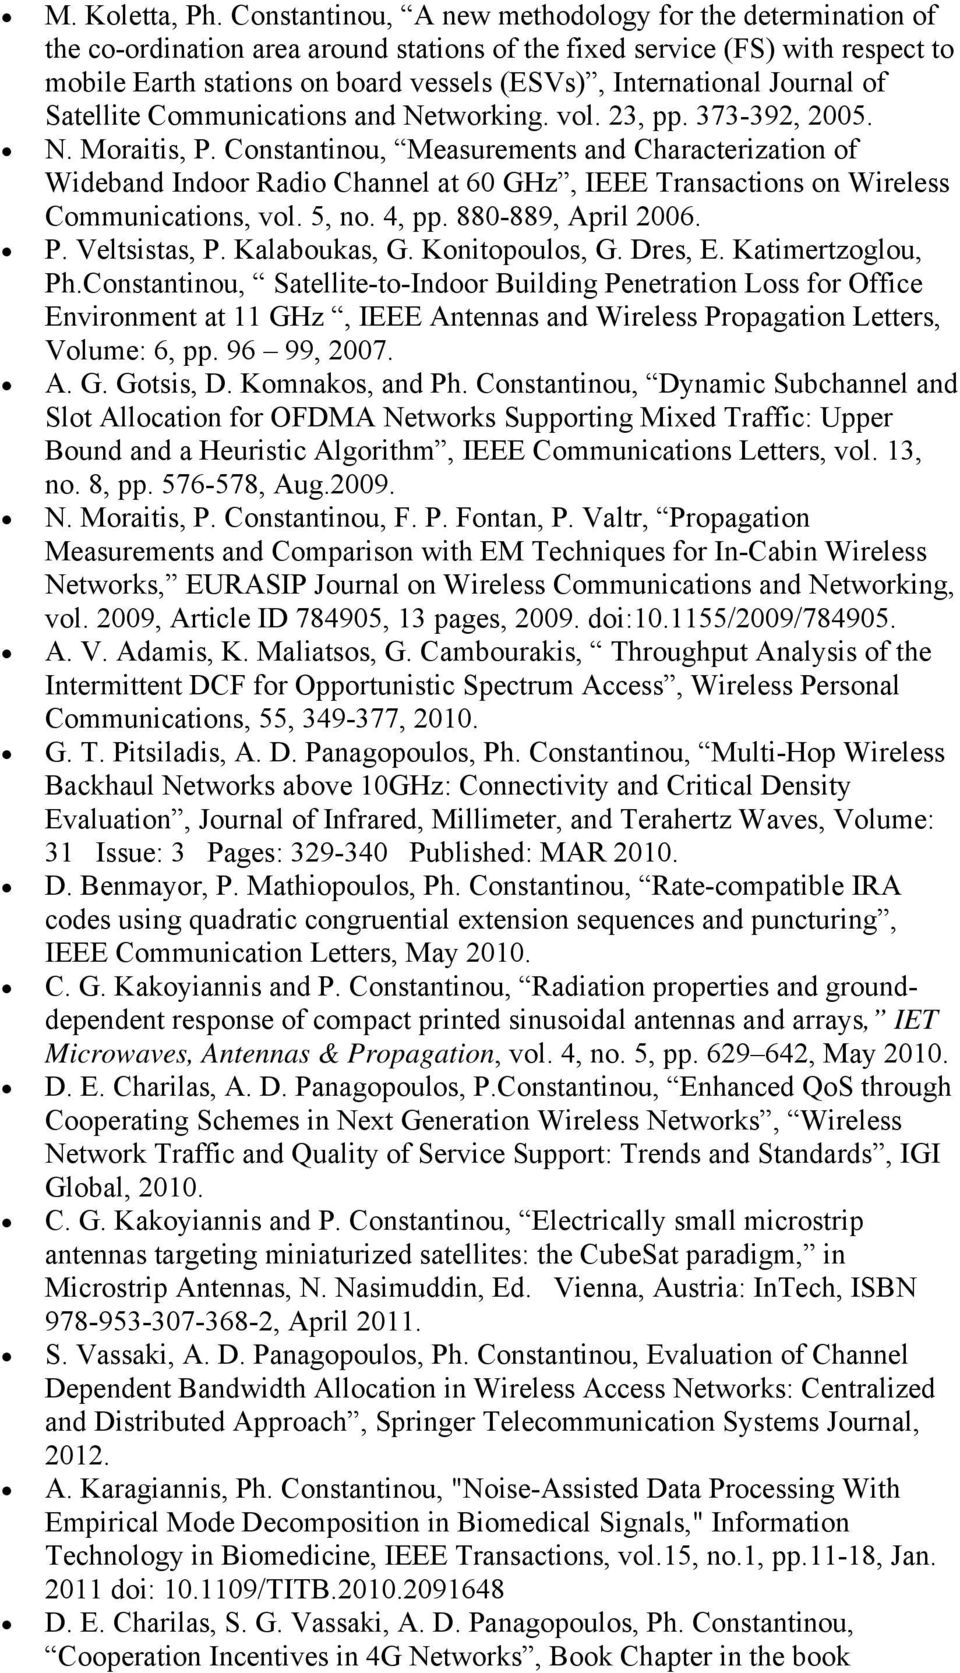 Journal of Satellite Communications and Networking. vol. 23, pp. 373-392, 2005. N. Moraitis, P.